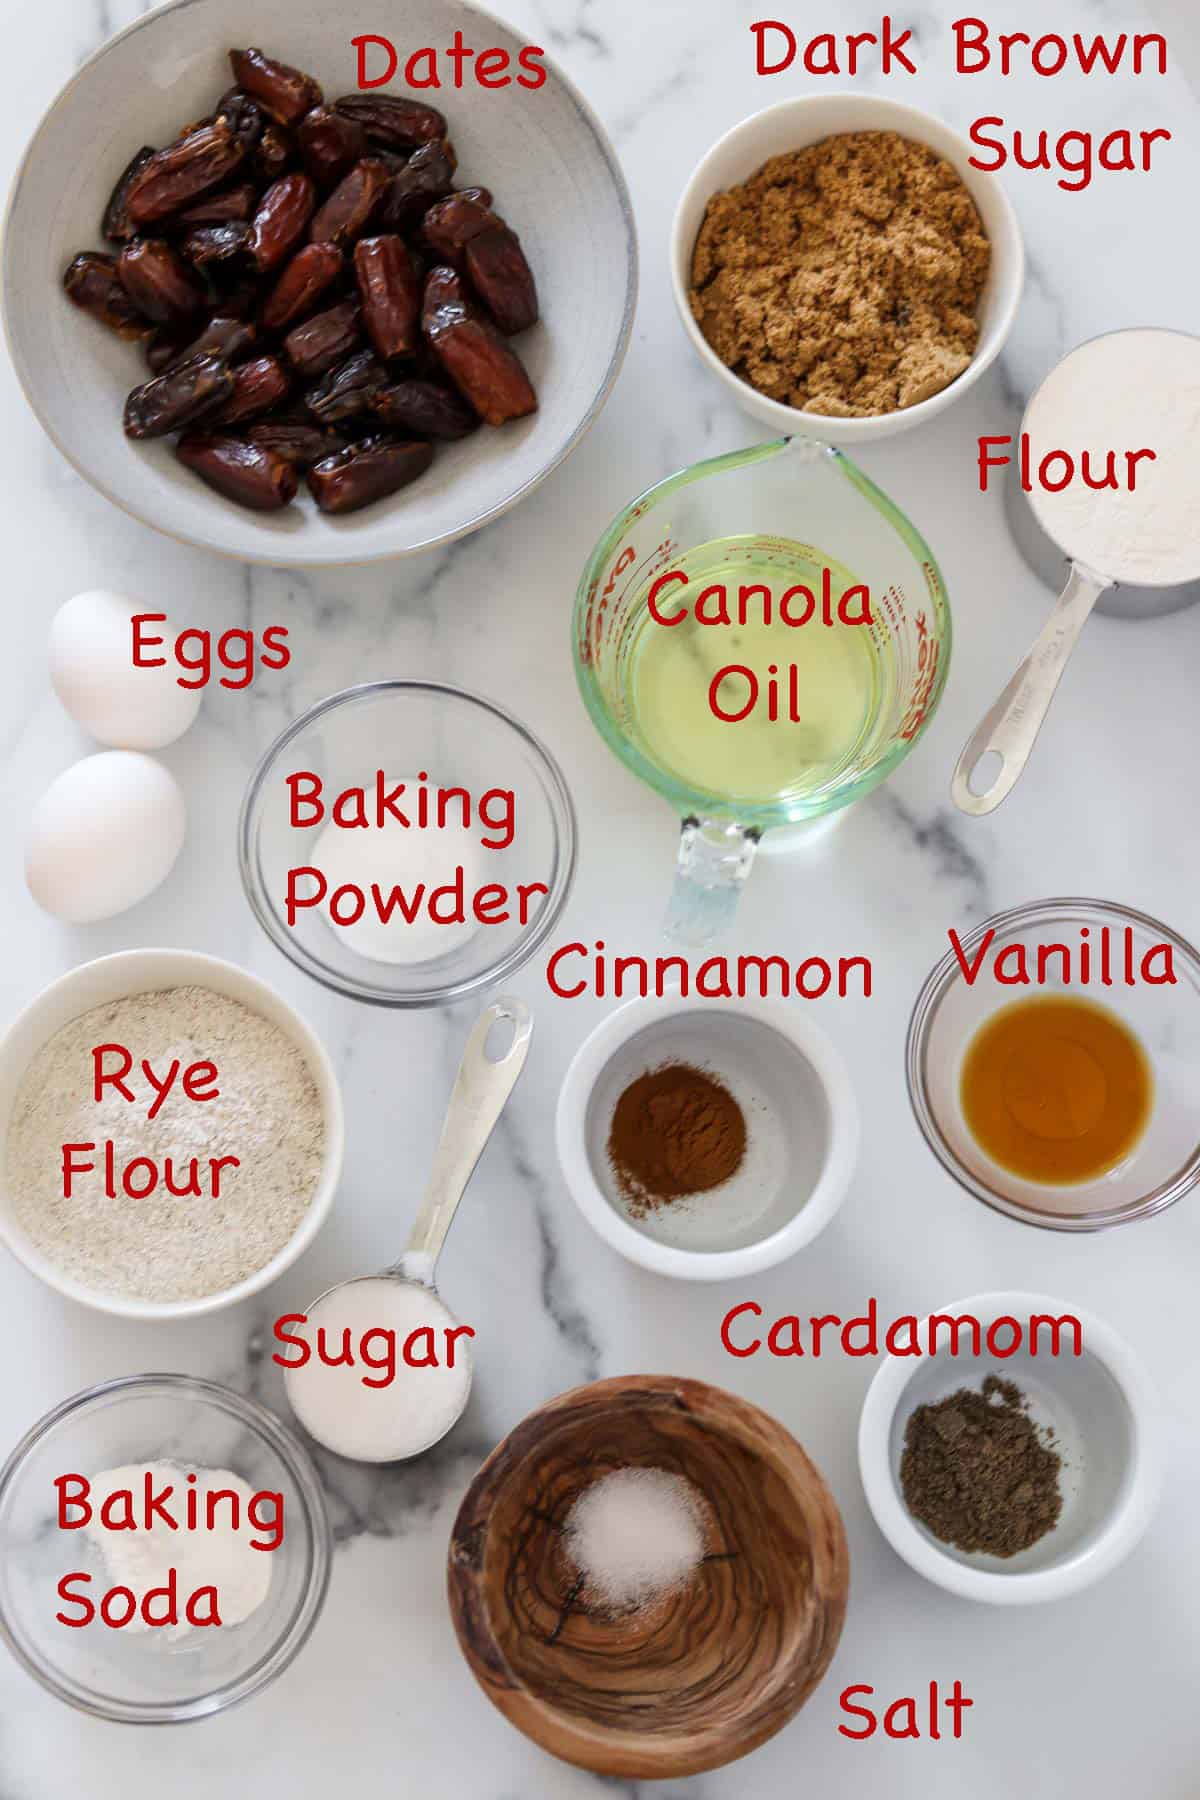 Labeled ingredients for Spice Cake with Dates, Rye and Salted Caramel Drizzle.